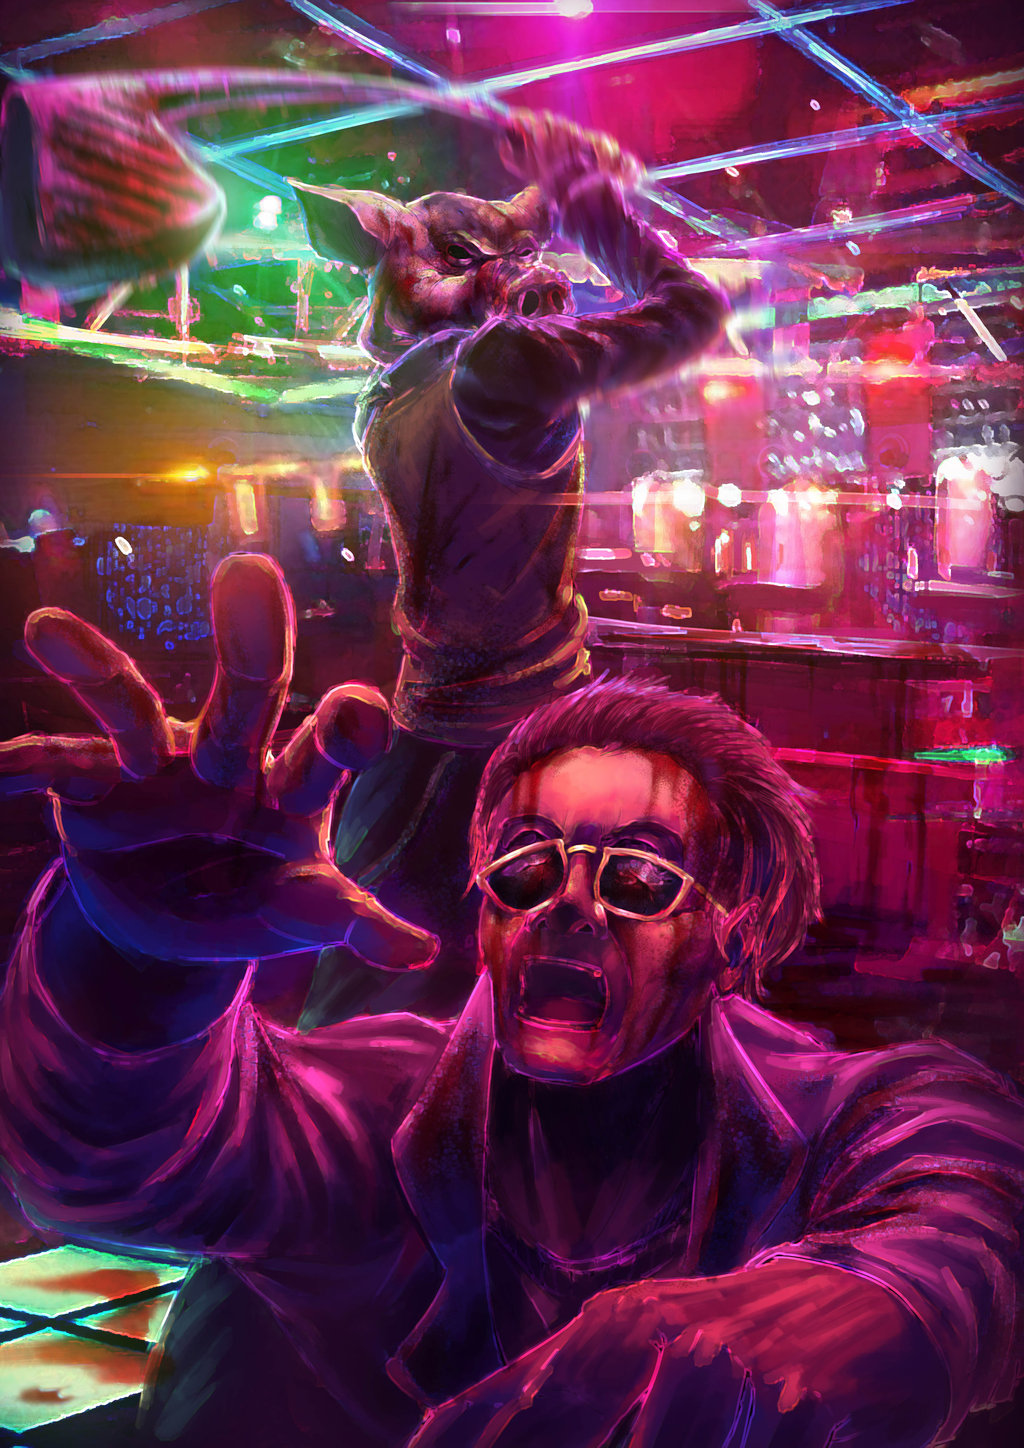 Hotline Miami Wallpaper By Thebossforever On Newgrounds